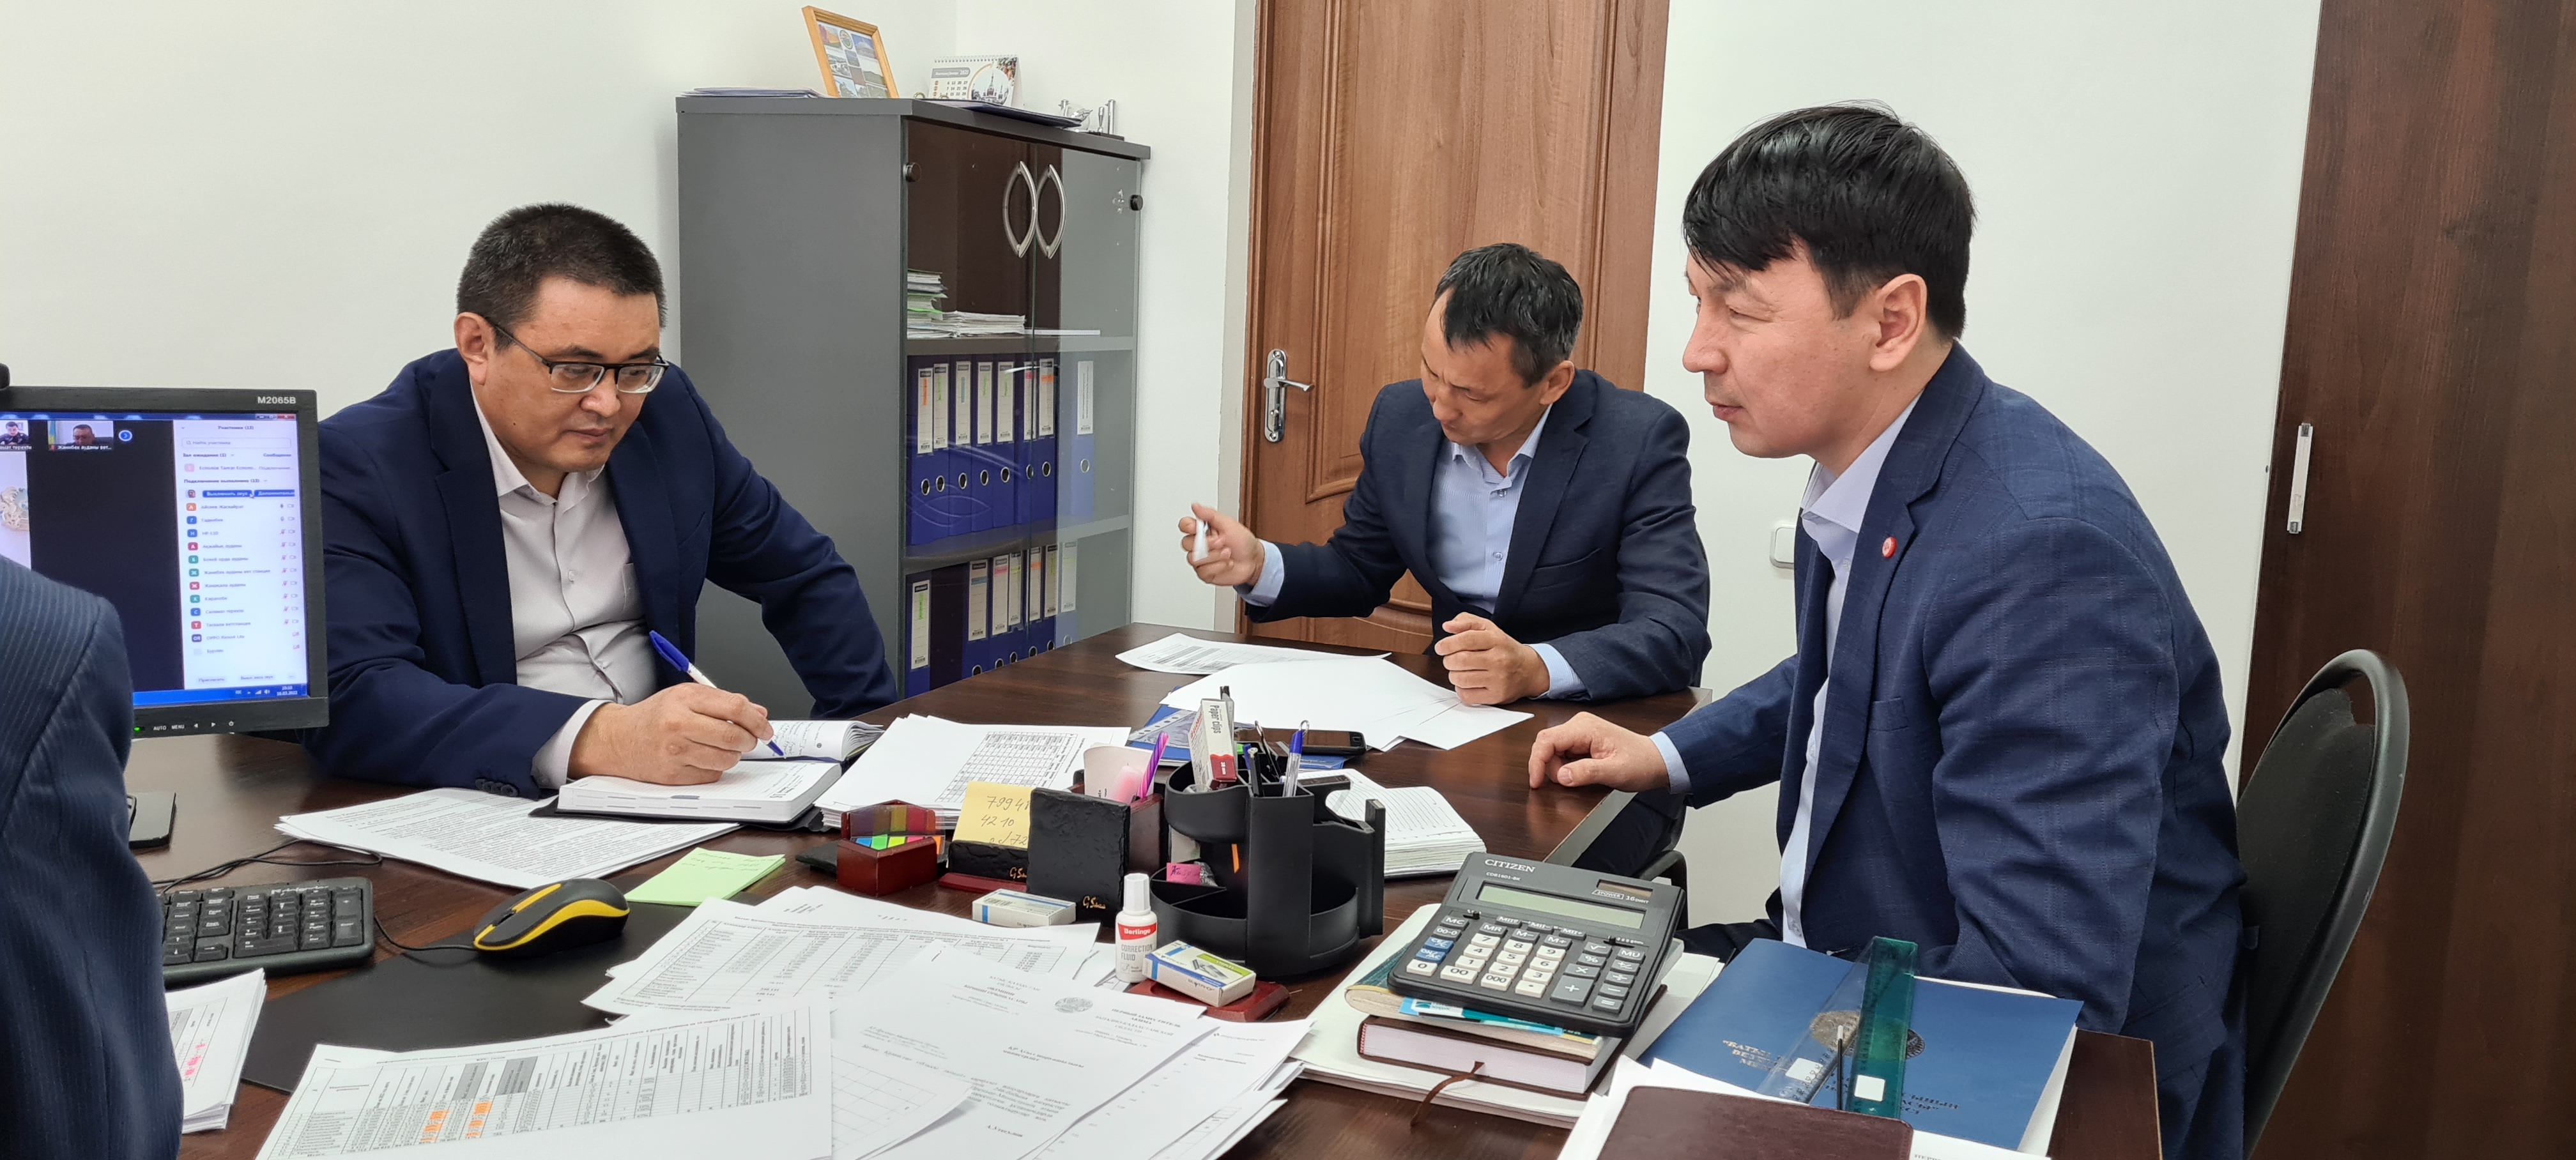 A conference call was held on the implementation of veterinary measures